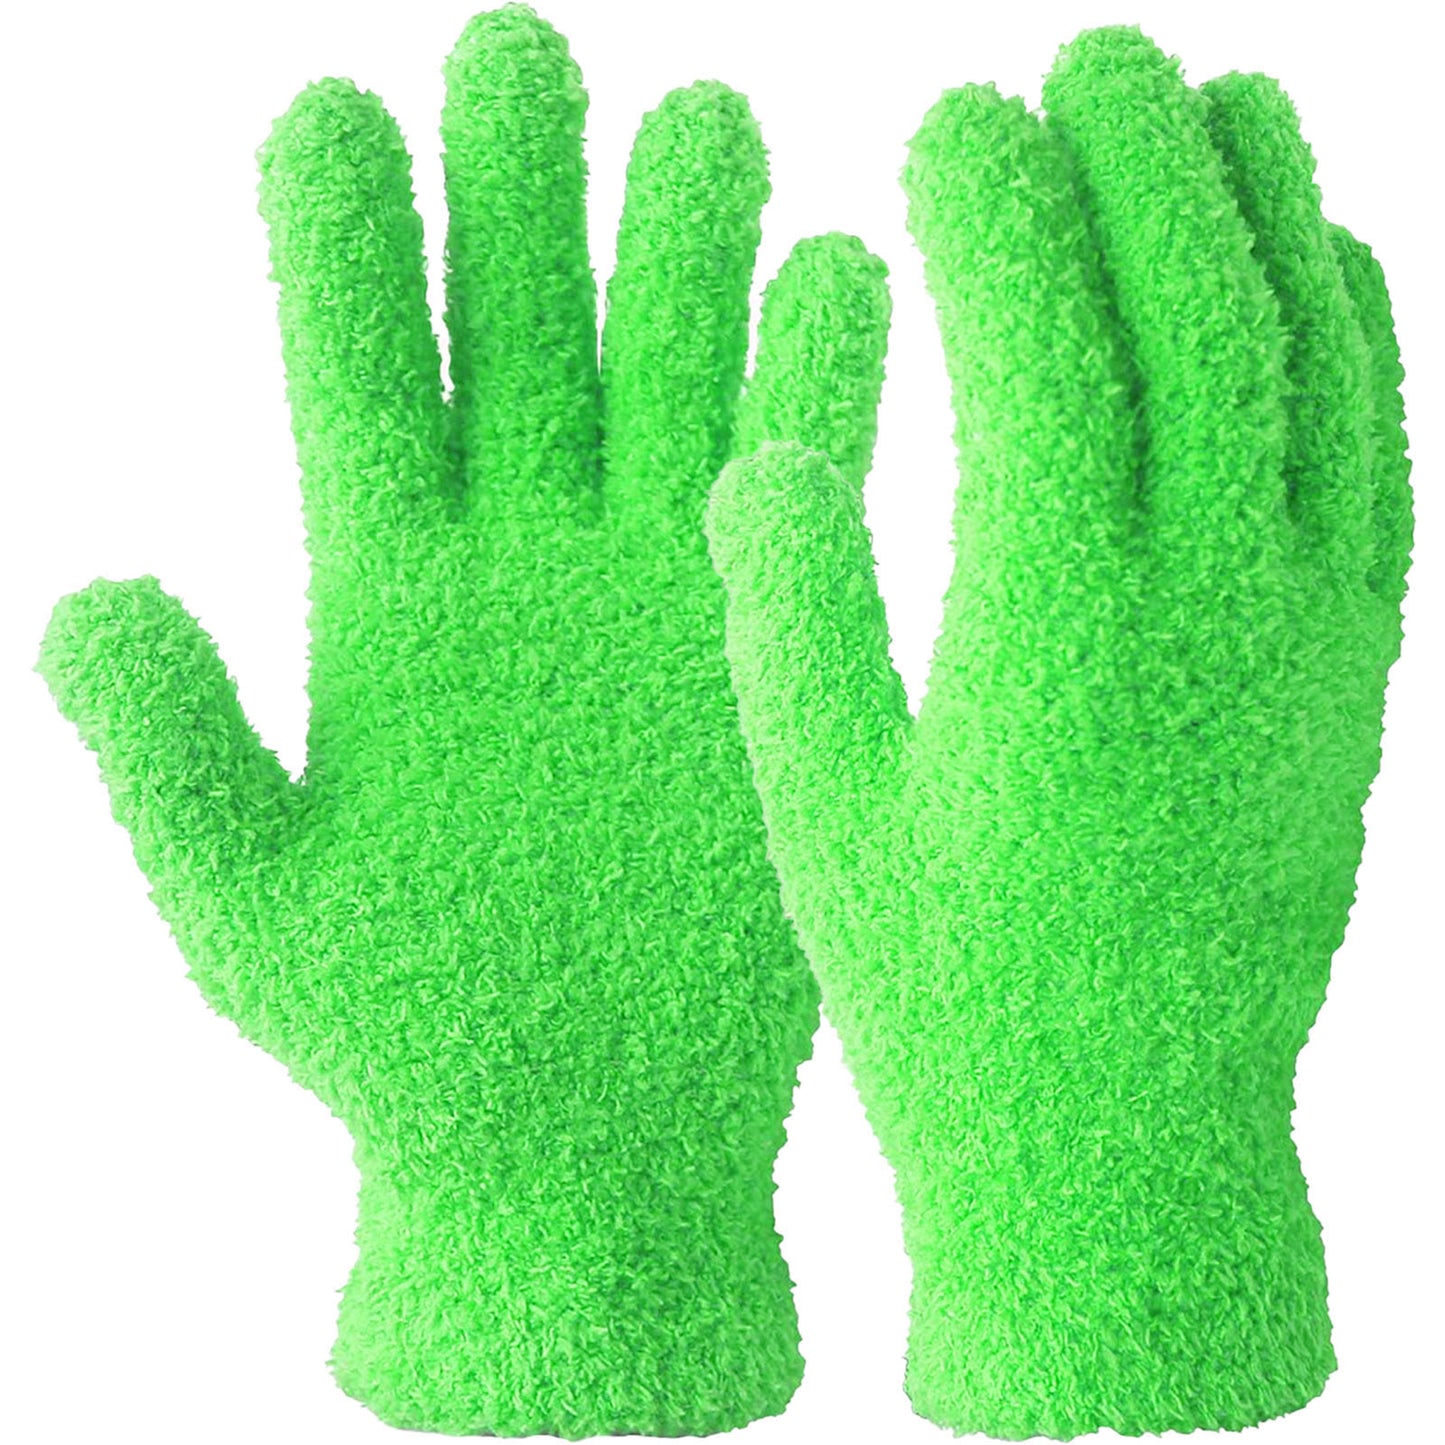 Evridwear Microfiber Auto Dusting Cleaning Gloves for Cars and Trucks, Dust Cleaning Gloves for House Cleaning, Perfect to Clean Mirrors